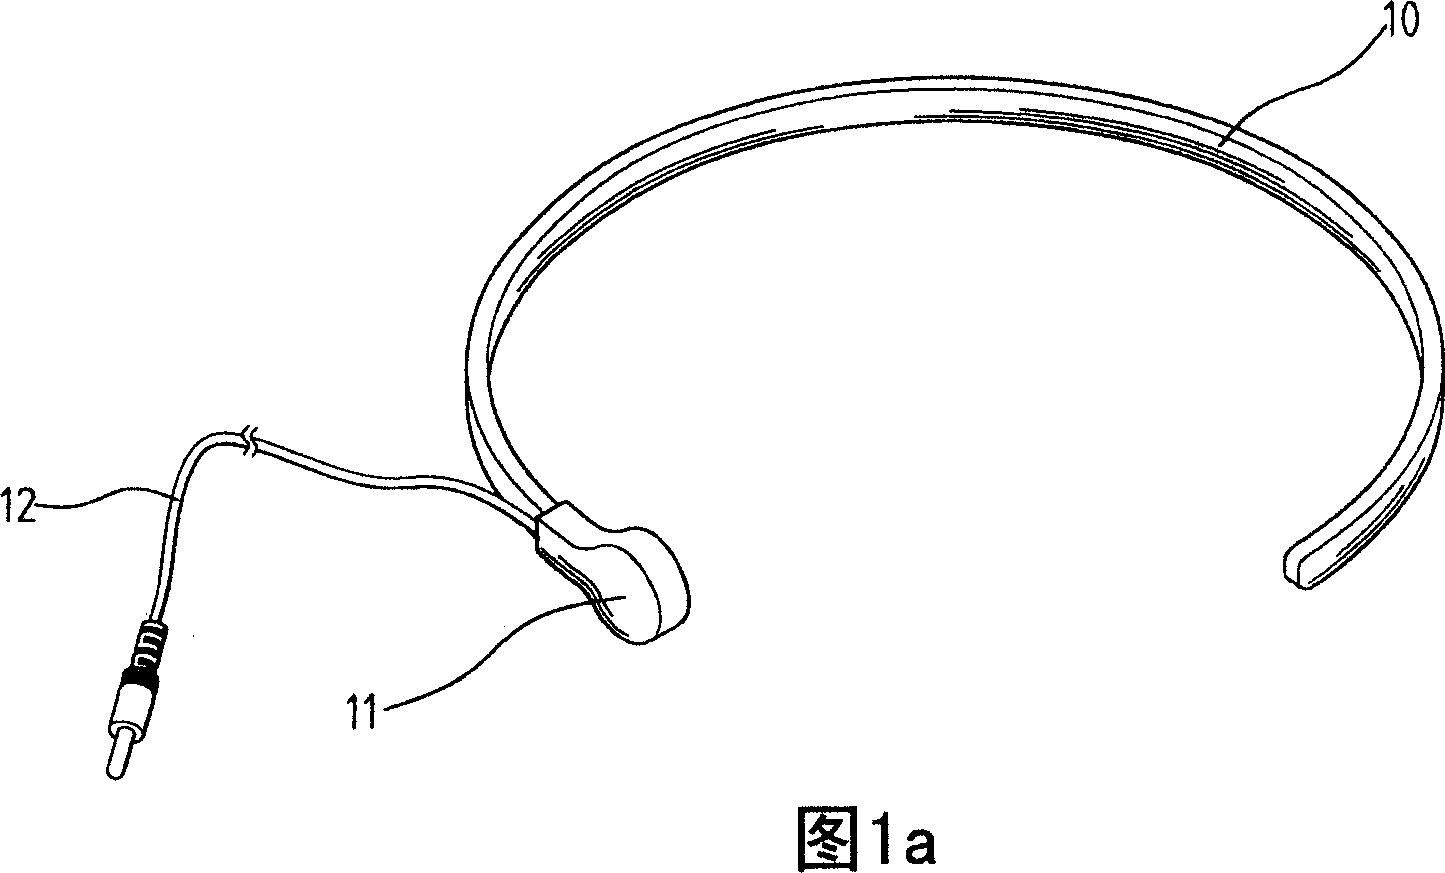 Stereo-extended contacting microphone apparatus